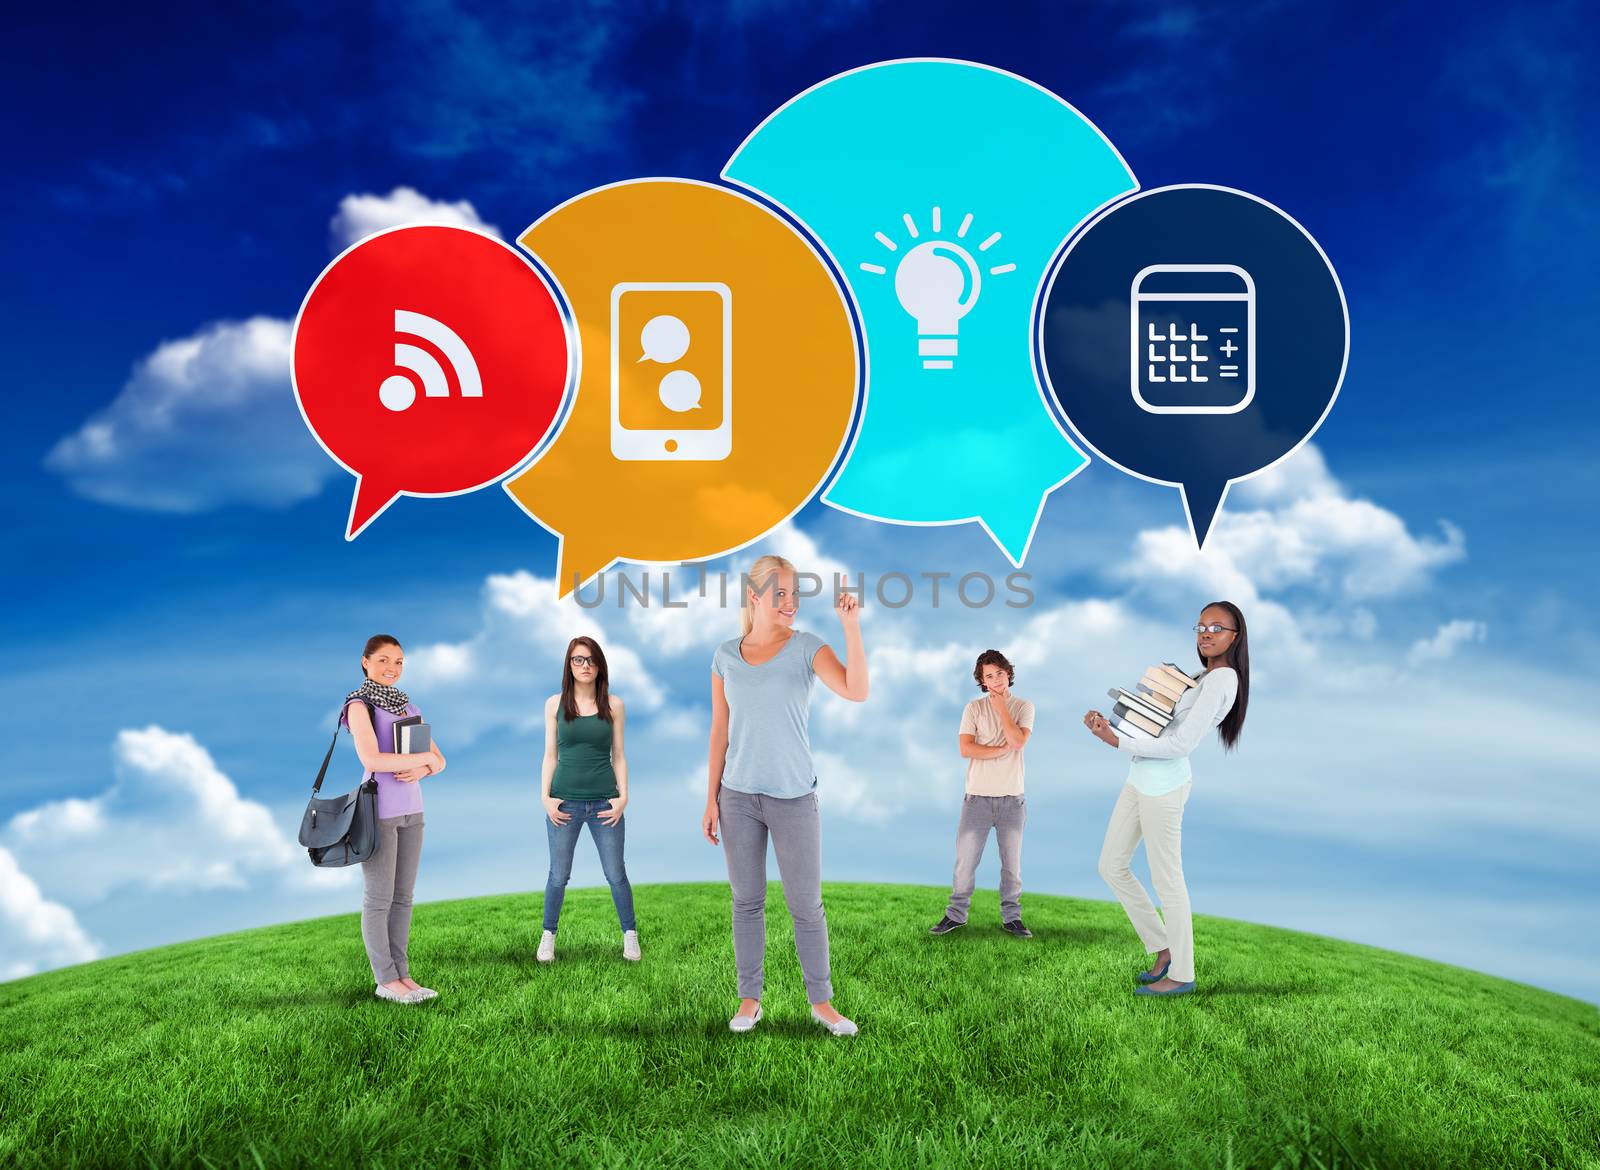 Composite image of happy students with speech bubbles against green field under blue sky